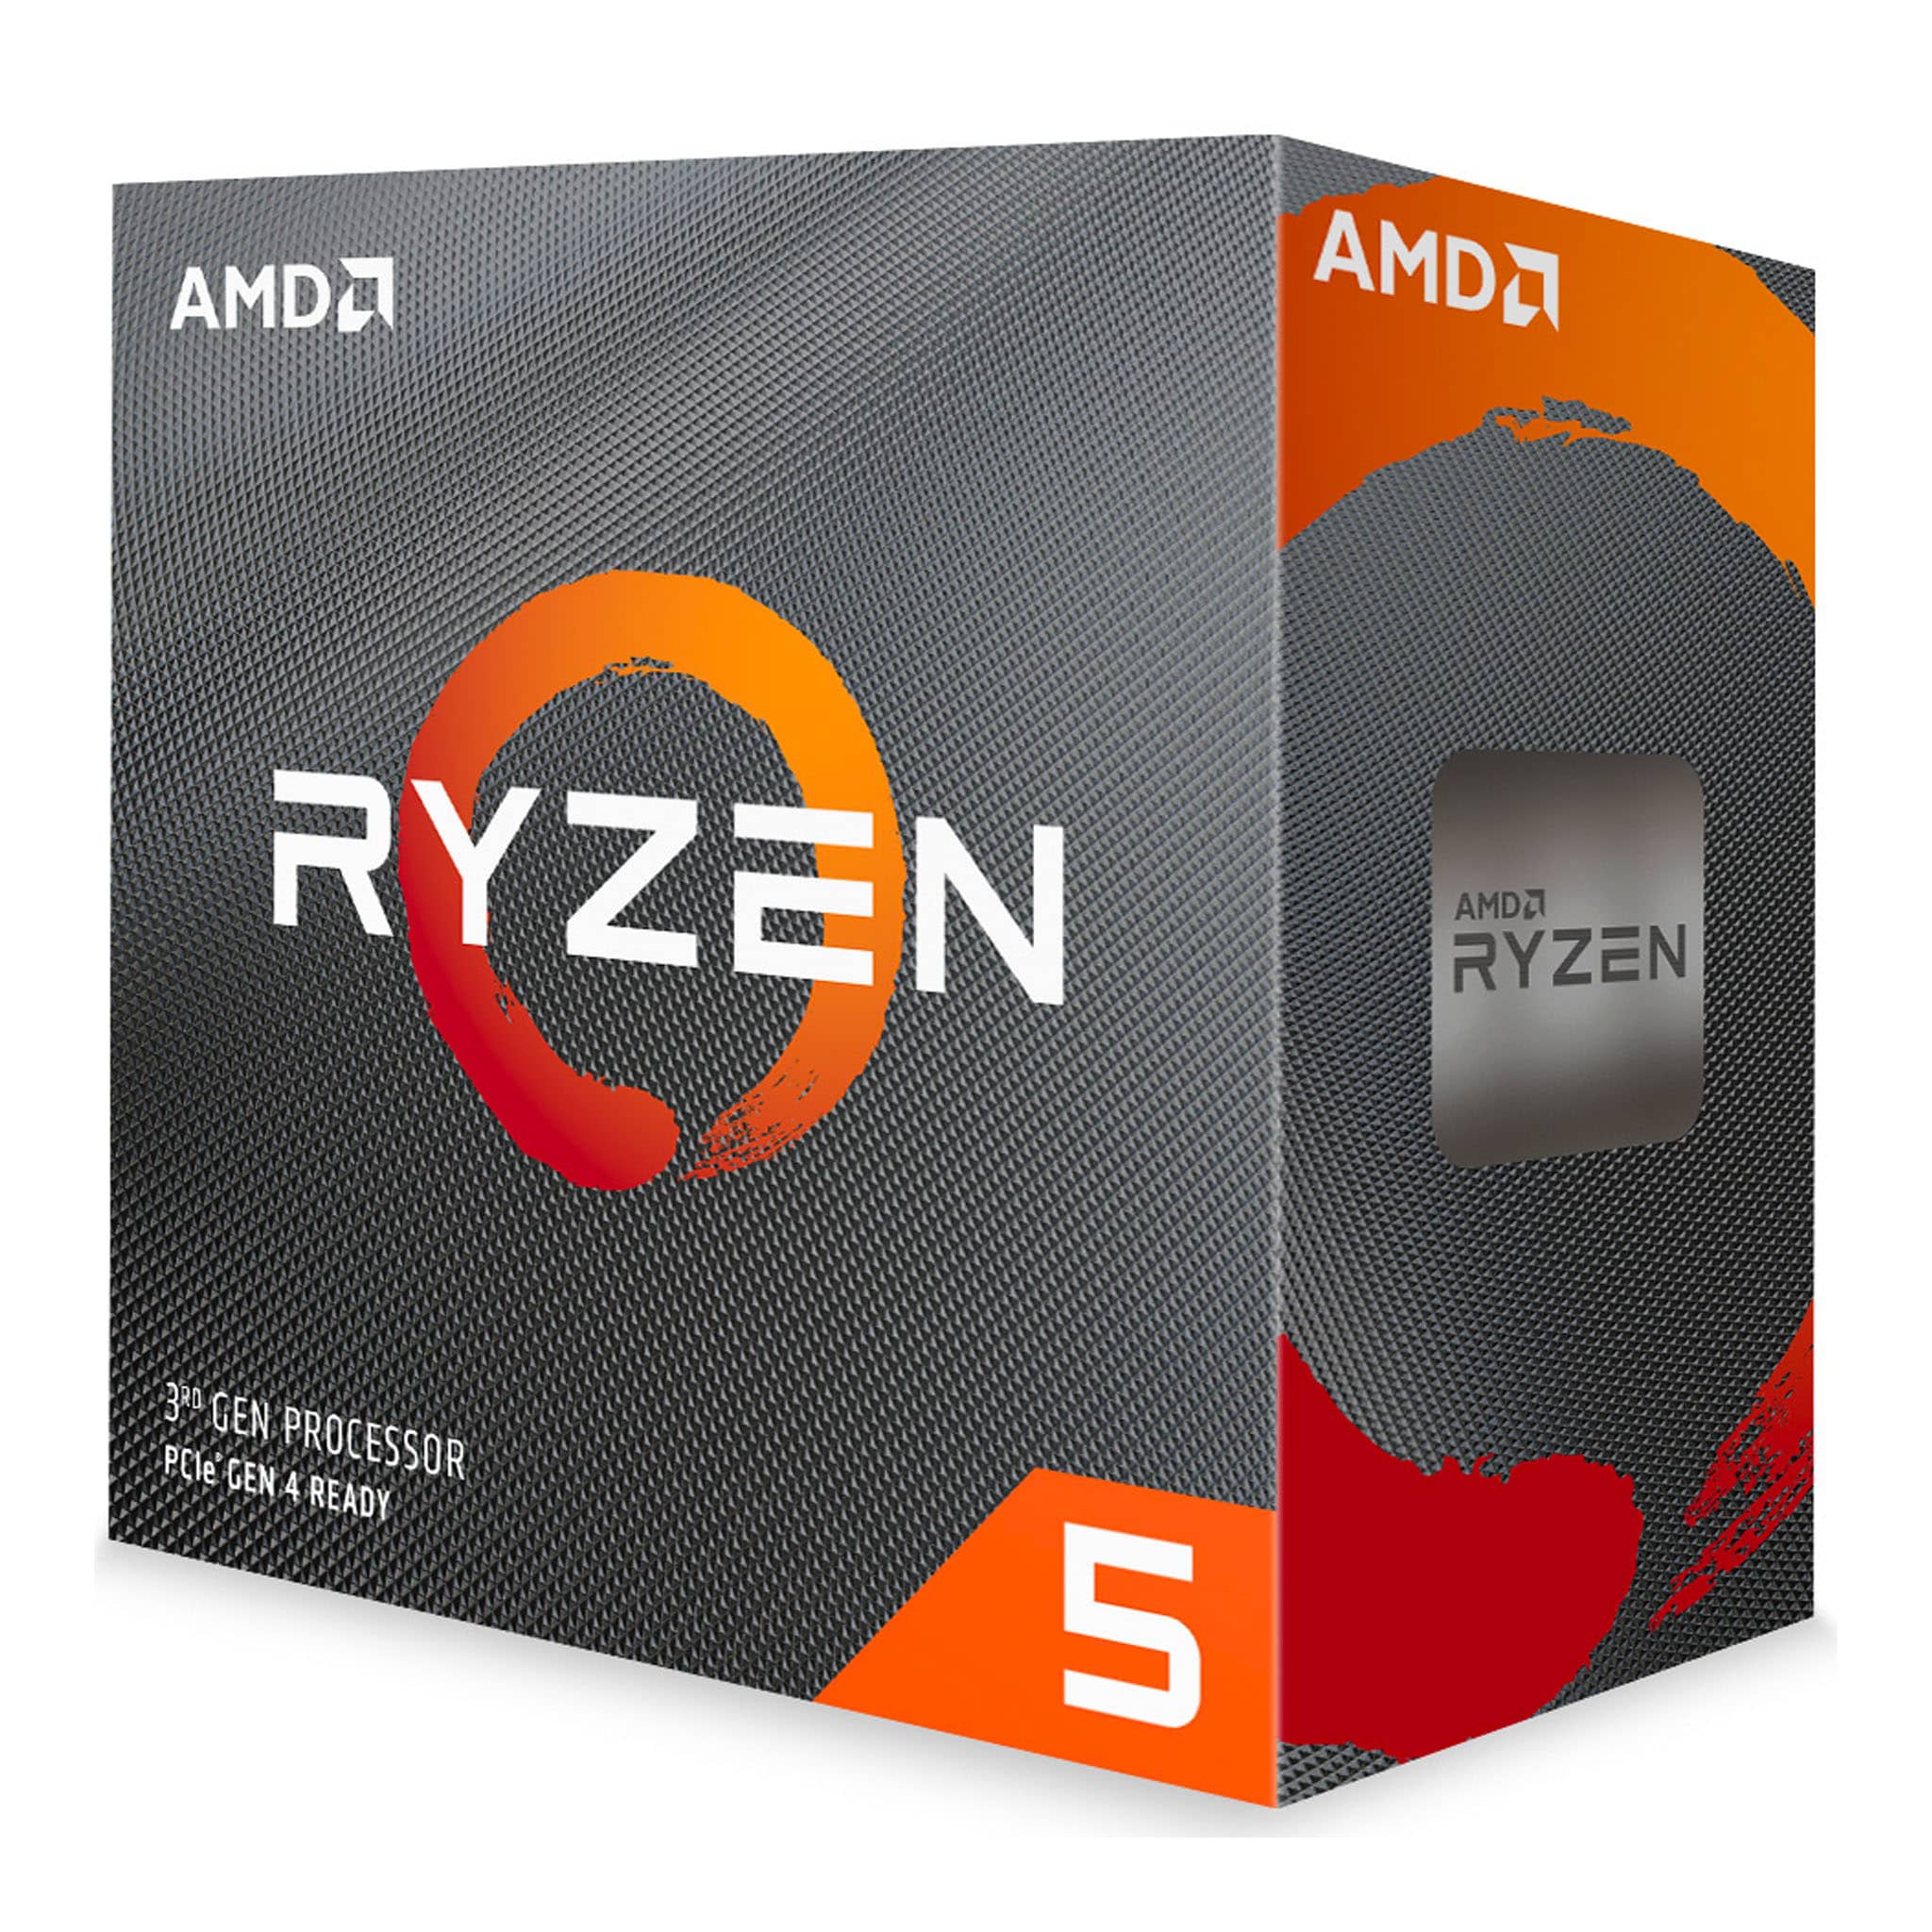 AMD Ryzen 5 3600 6 Core AM4 3.60 GHz Unlocked CPU Processor (4.2 GHz Max Boost) With Wraith Stealth